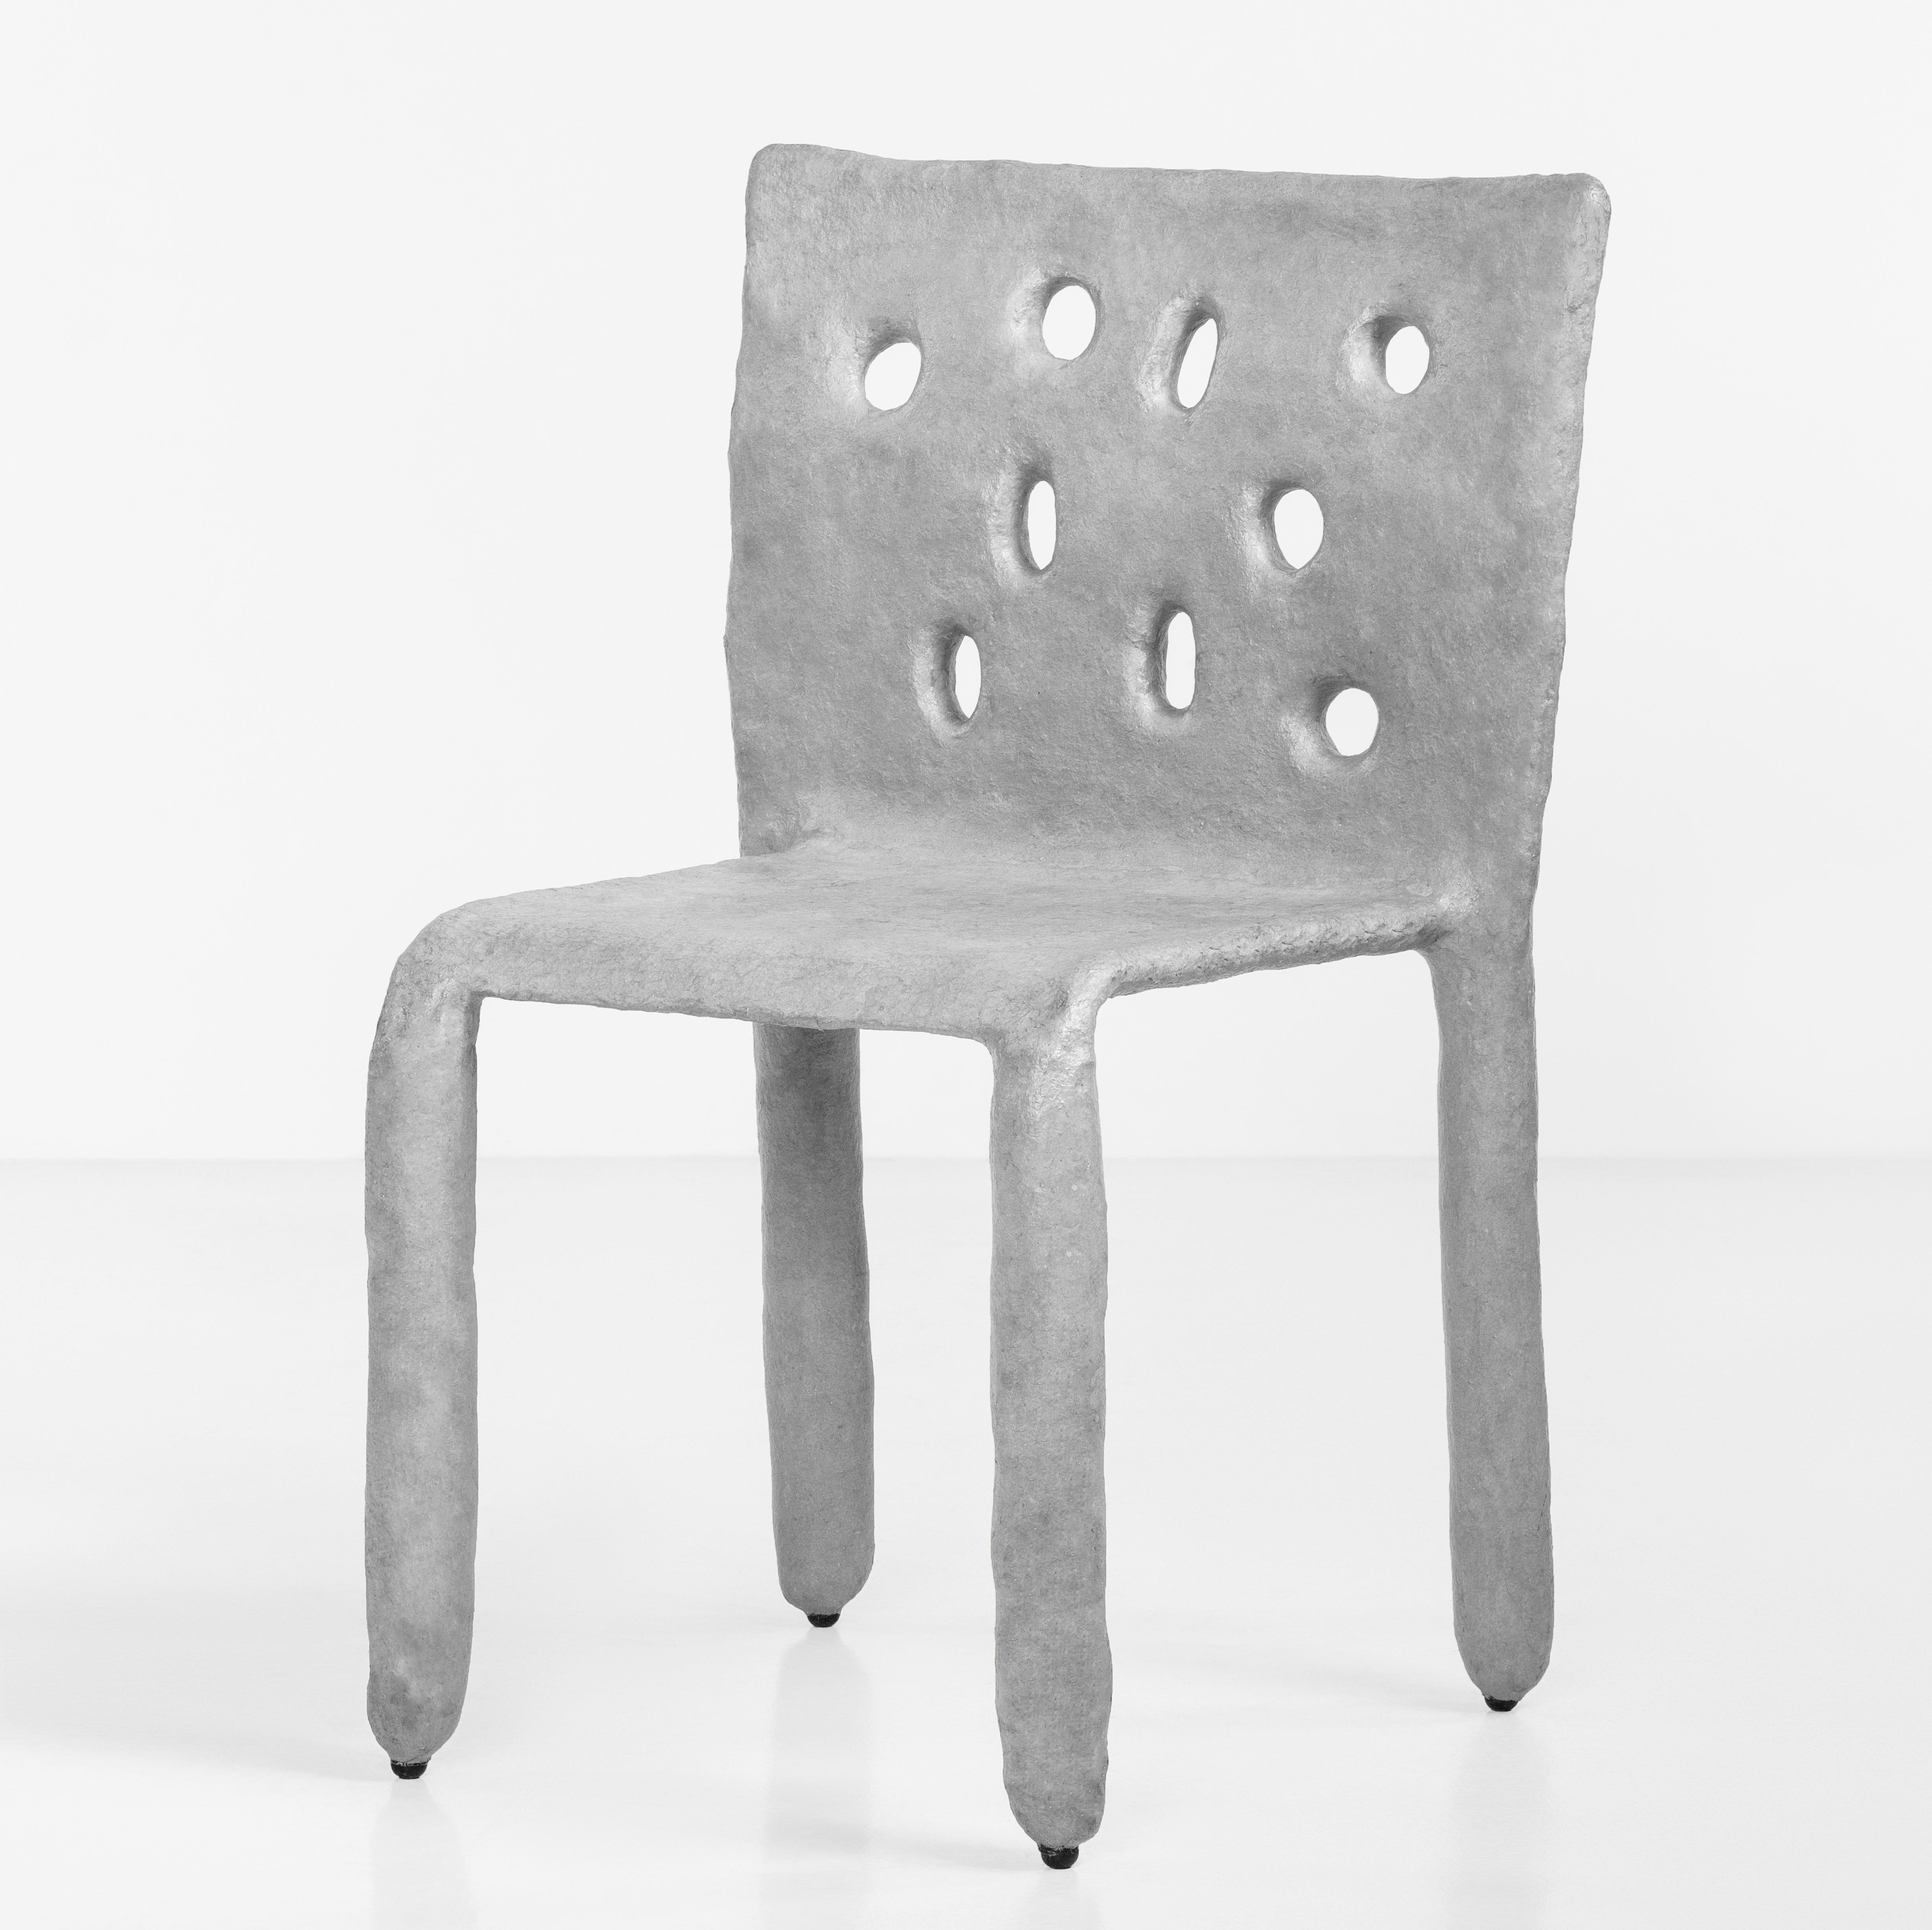 Red Sculpted Contemporary Chair by FAINA 2